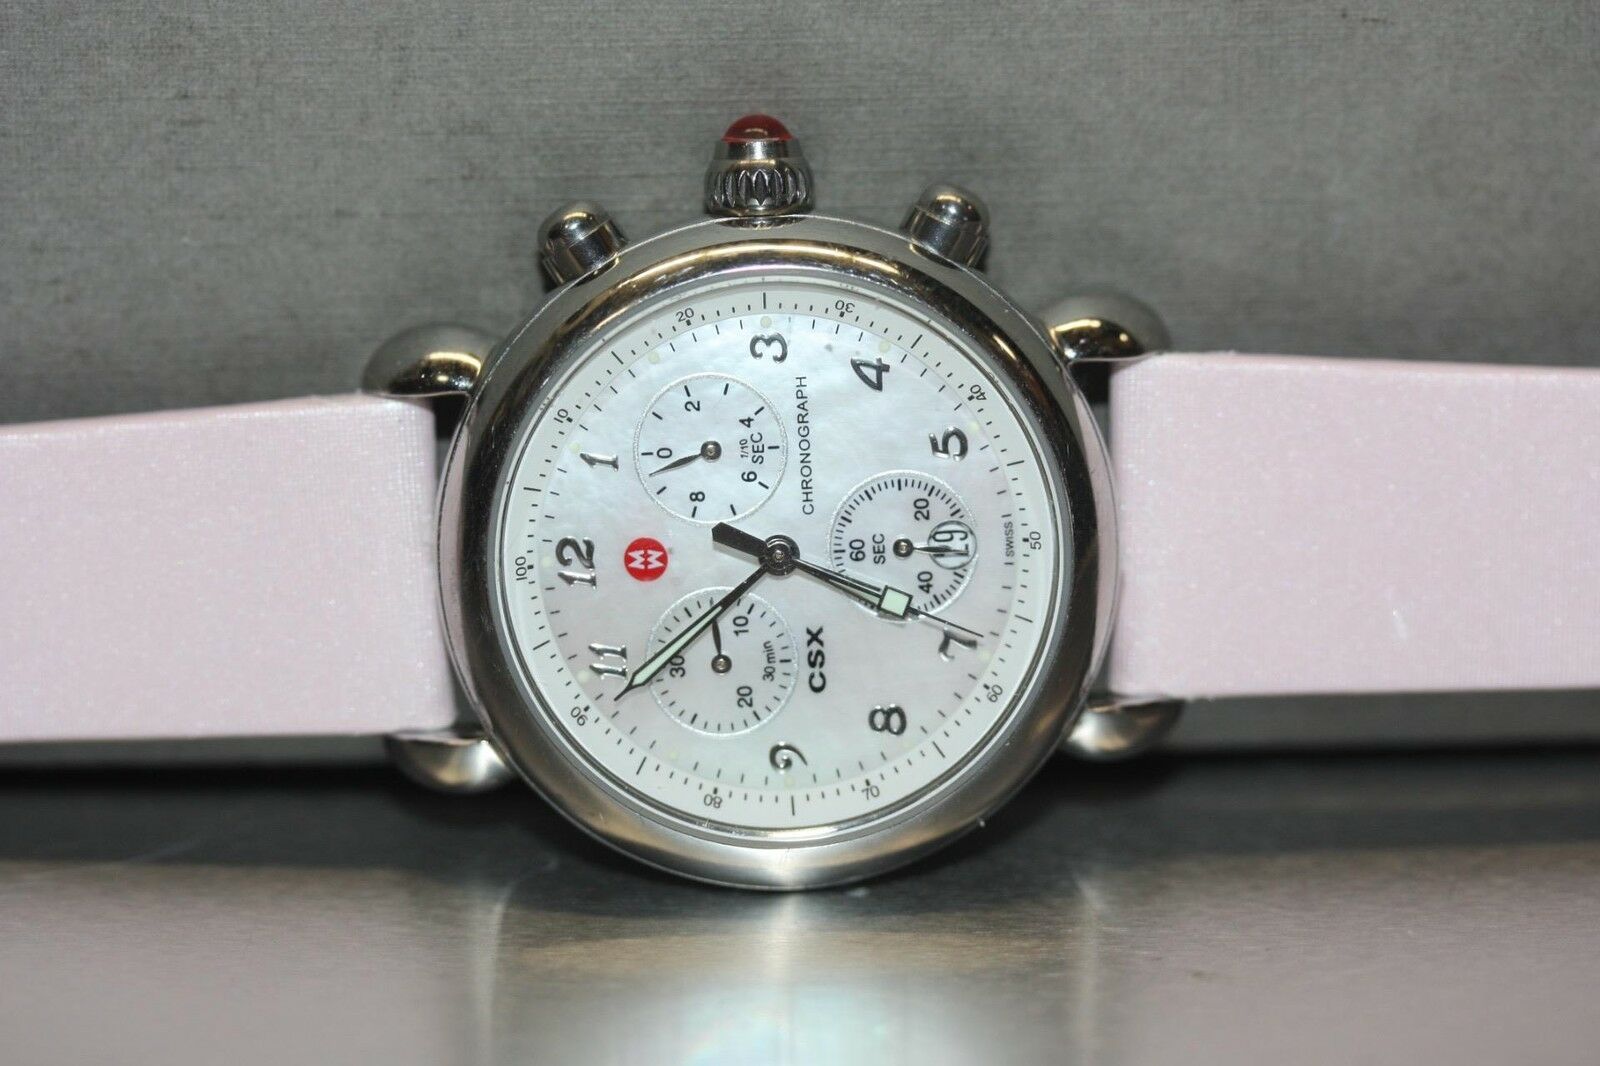 Michele "CSX" Stainless Steel Chronograph MOP Dial Watch W/ Pink strap - $257.13